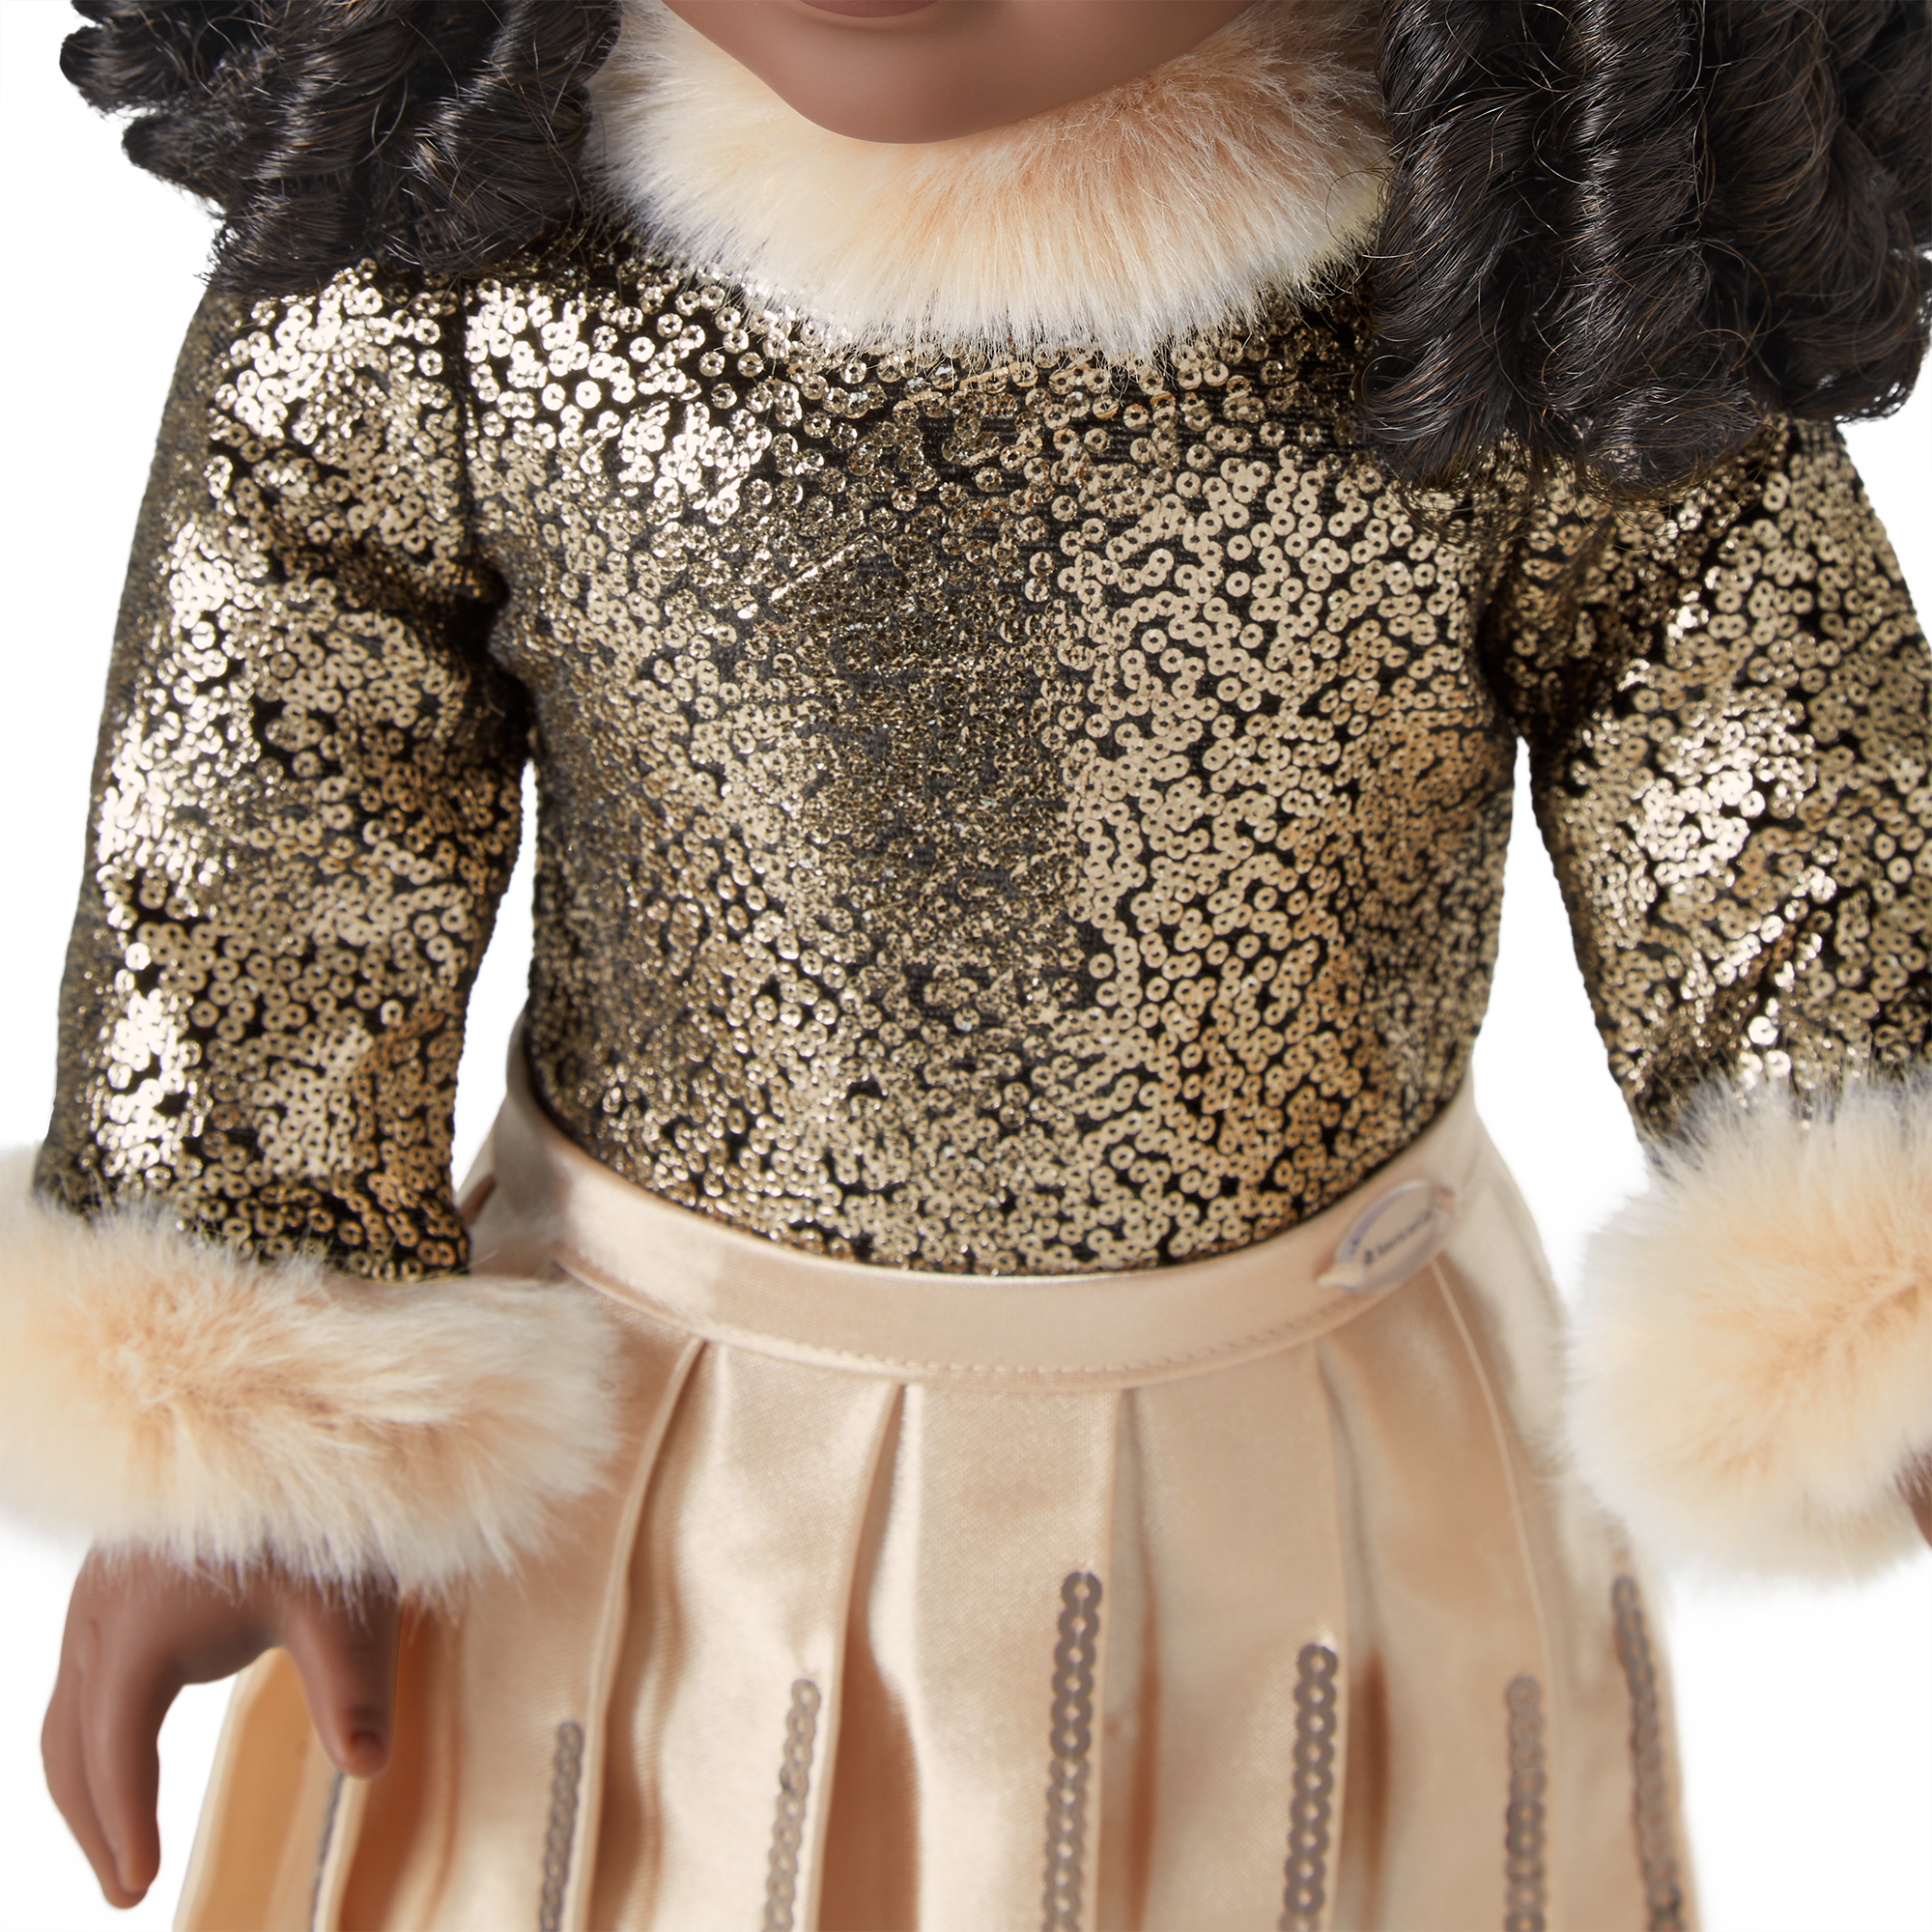 Meet Claudie, the American Girl Doll Outfitted by Harlem's Fashion Row  Designer Sammy B